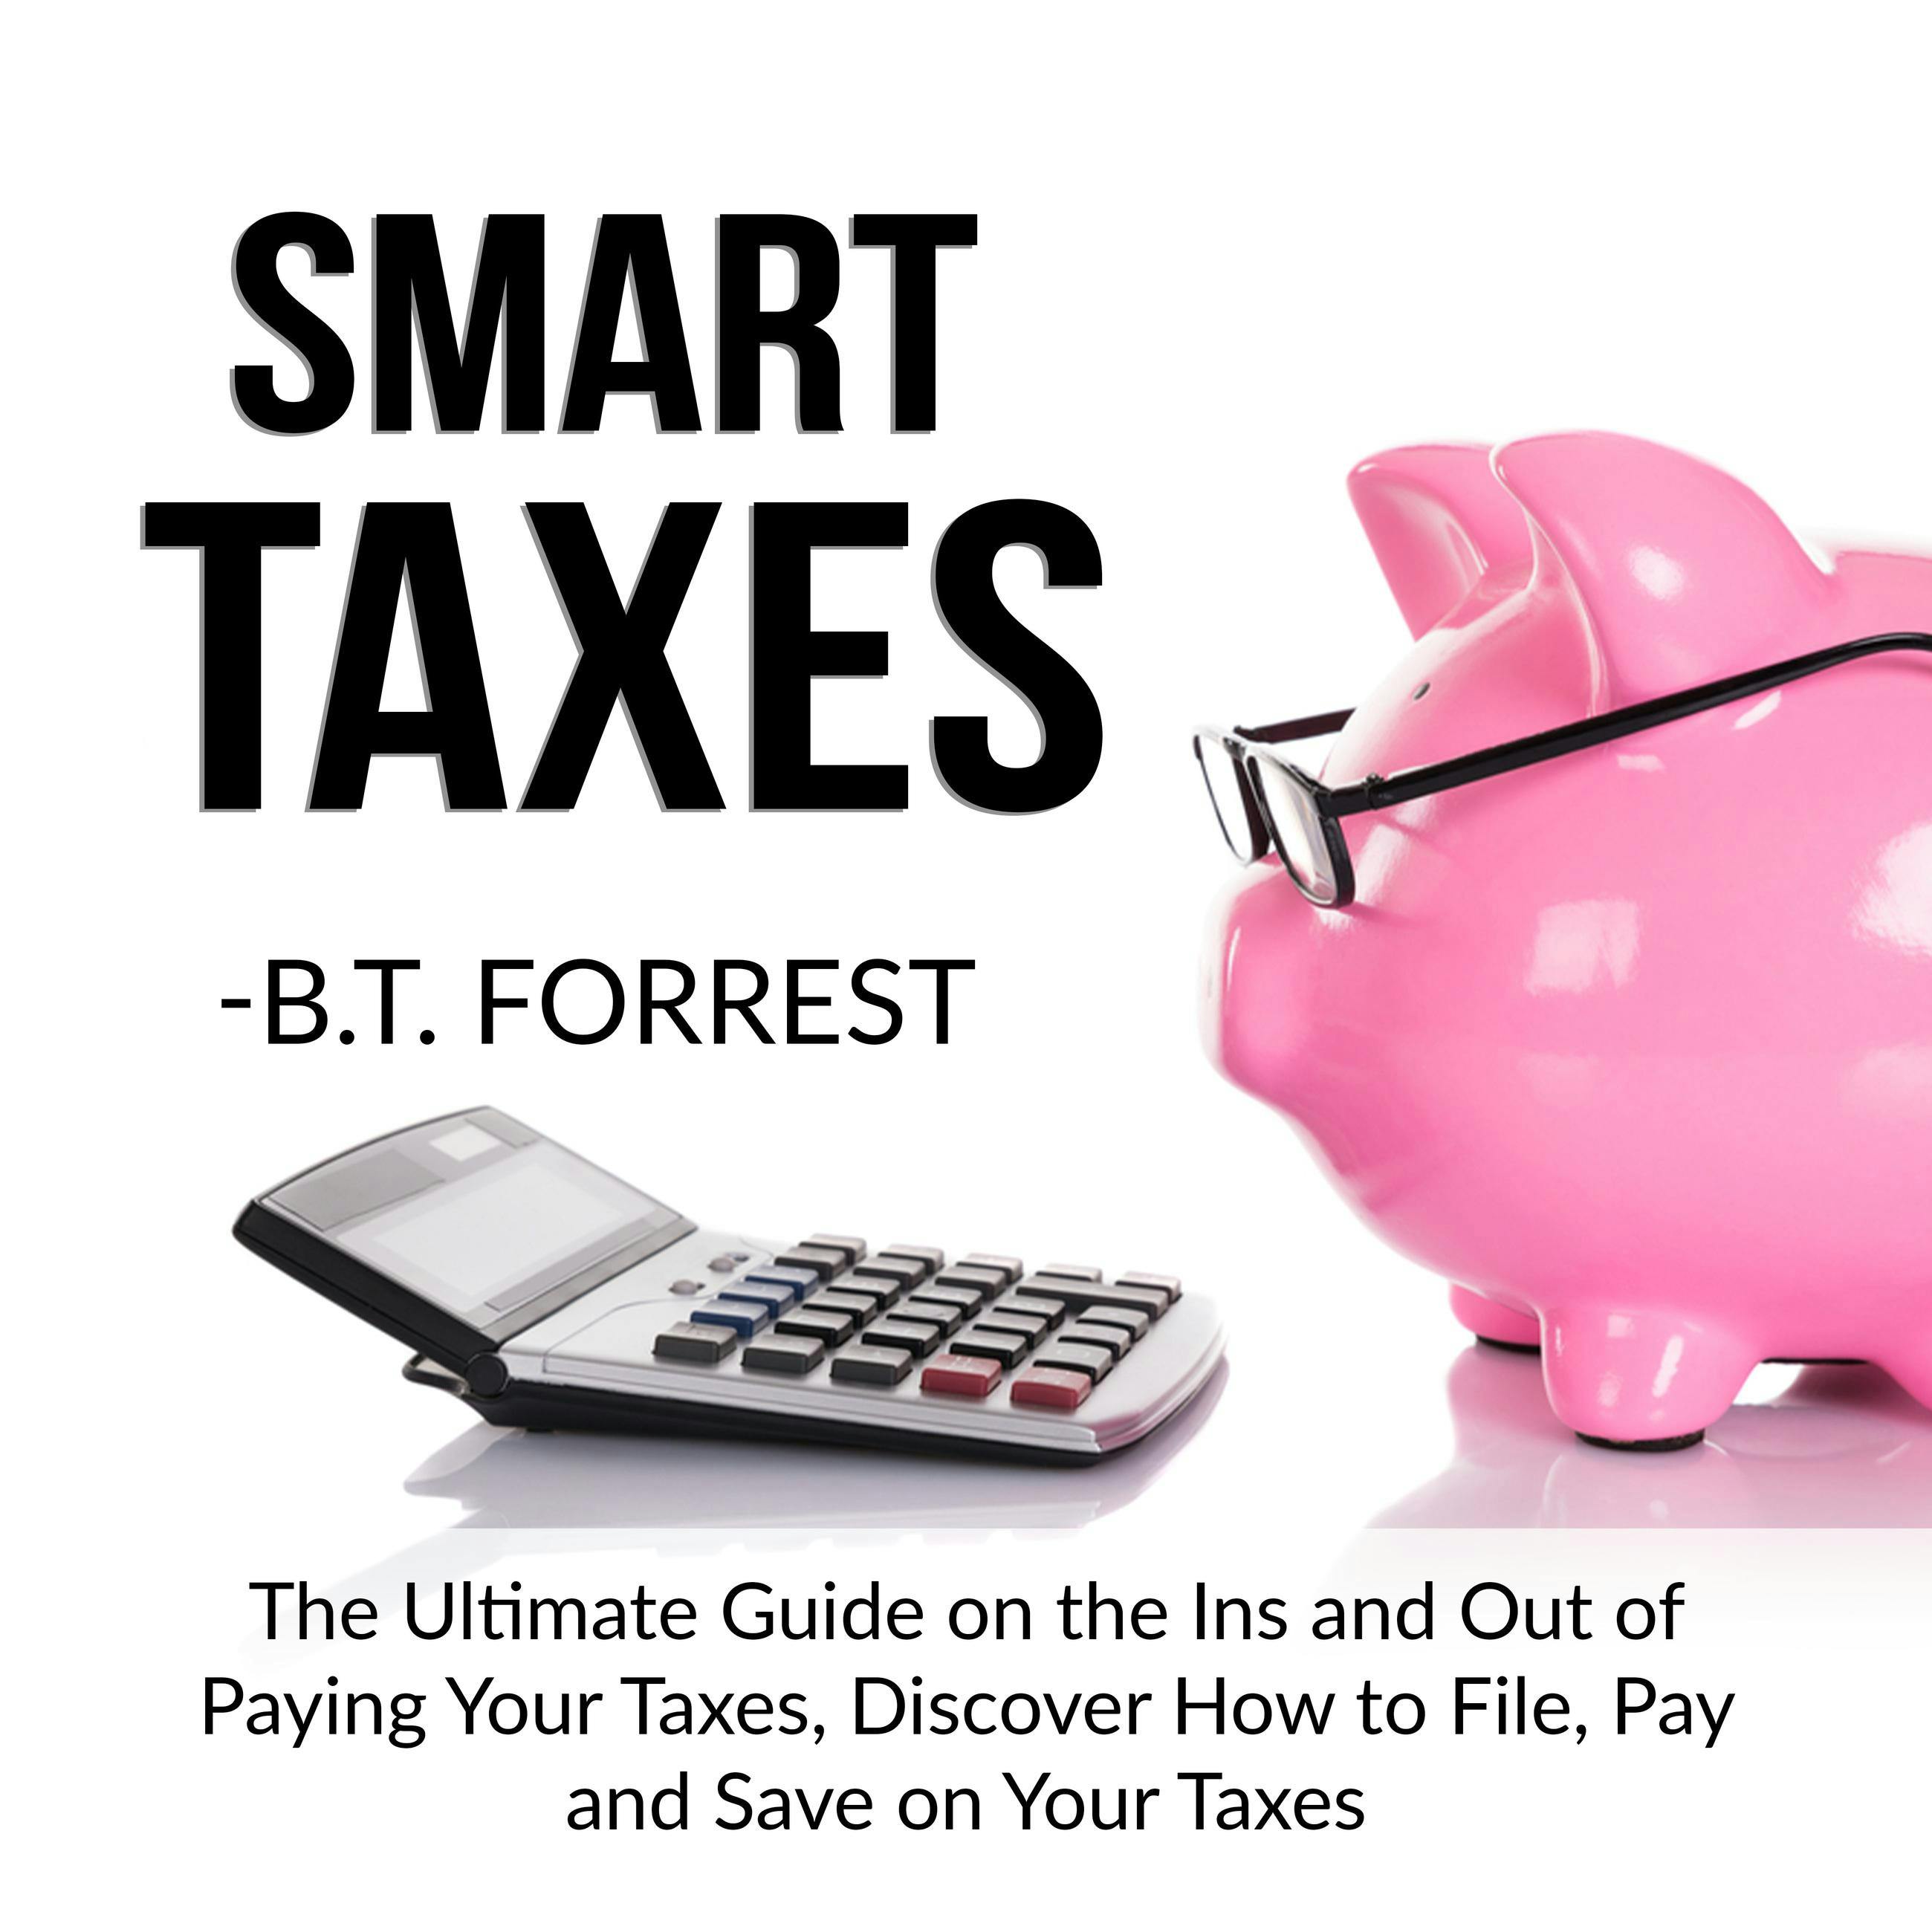 Smart Taxes: The Ultimate Guide on the Ins and Out of Paying Your Taxes, Discover How to File, Pay and Save on Your Taxes - undefined